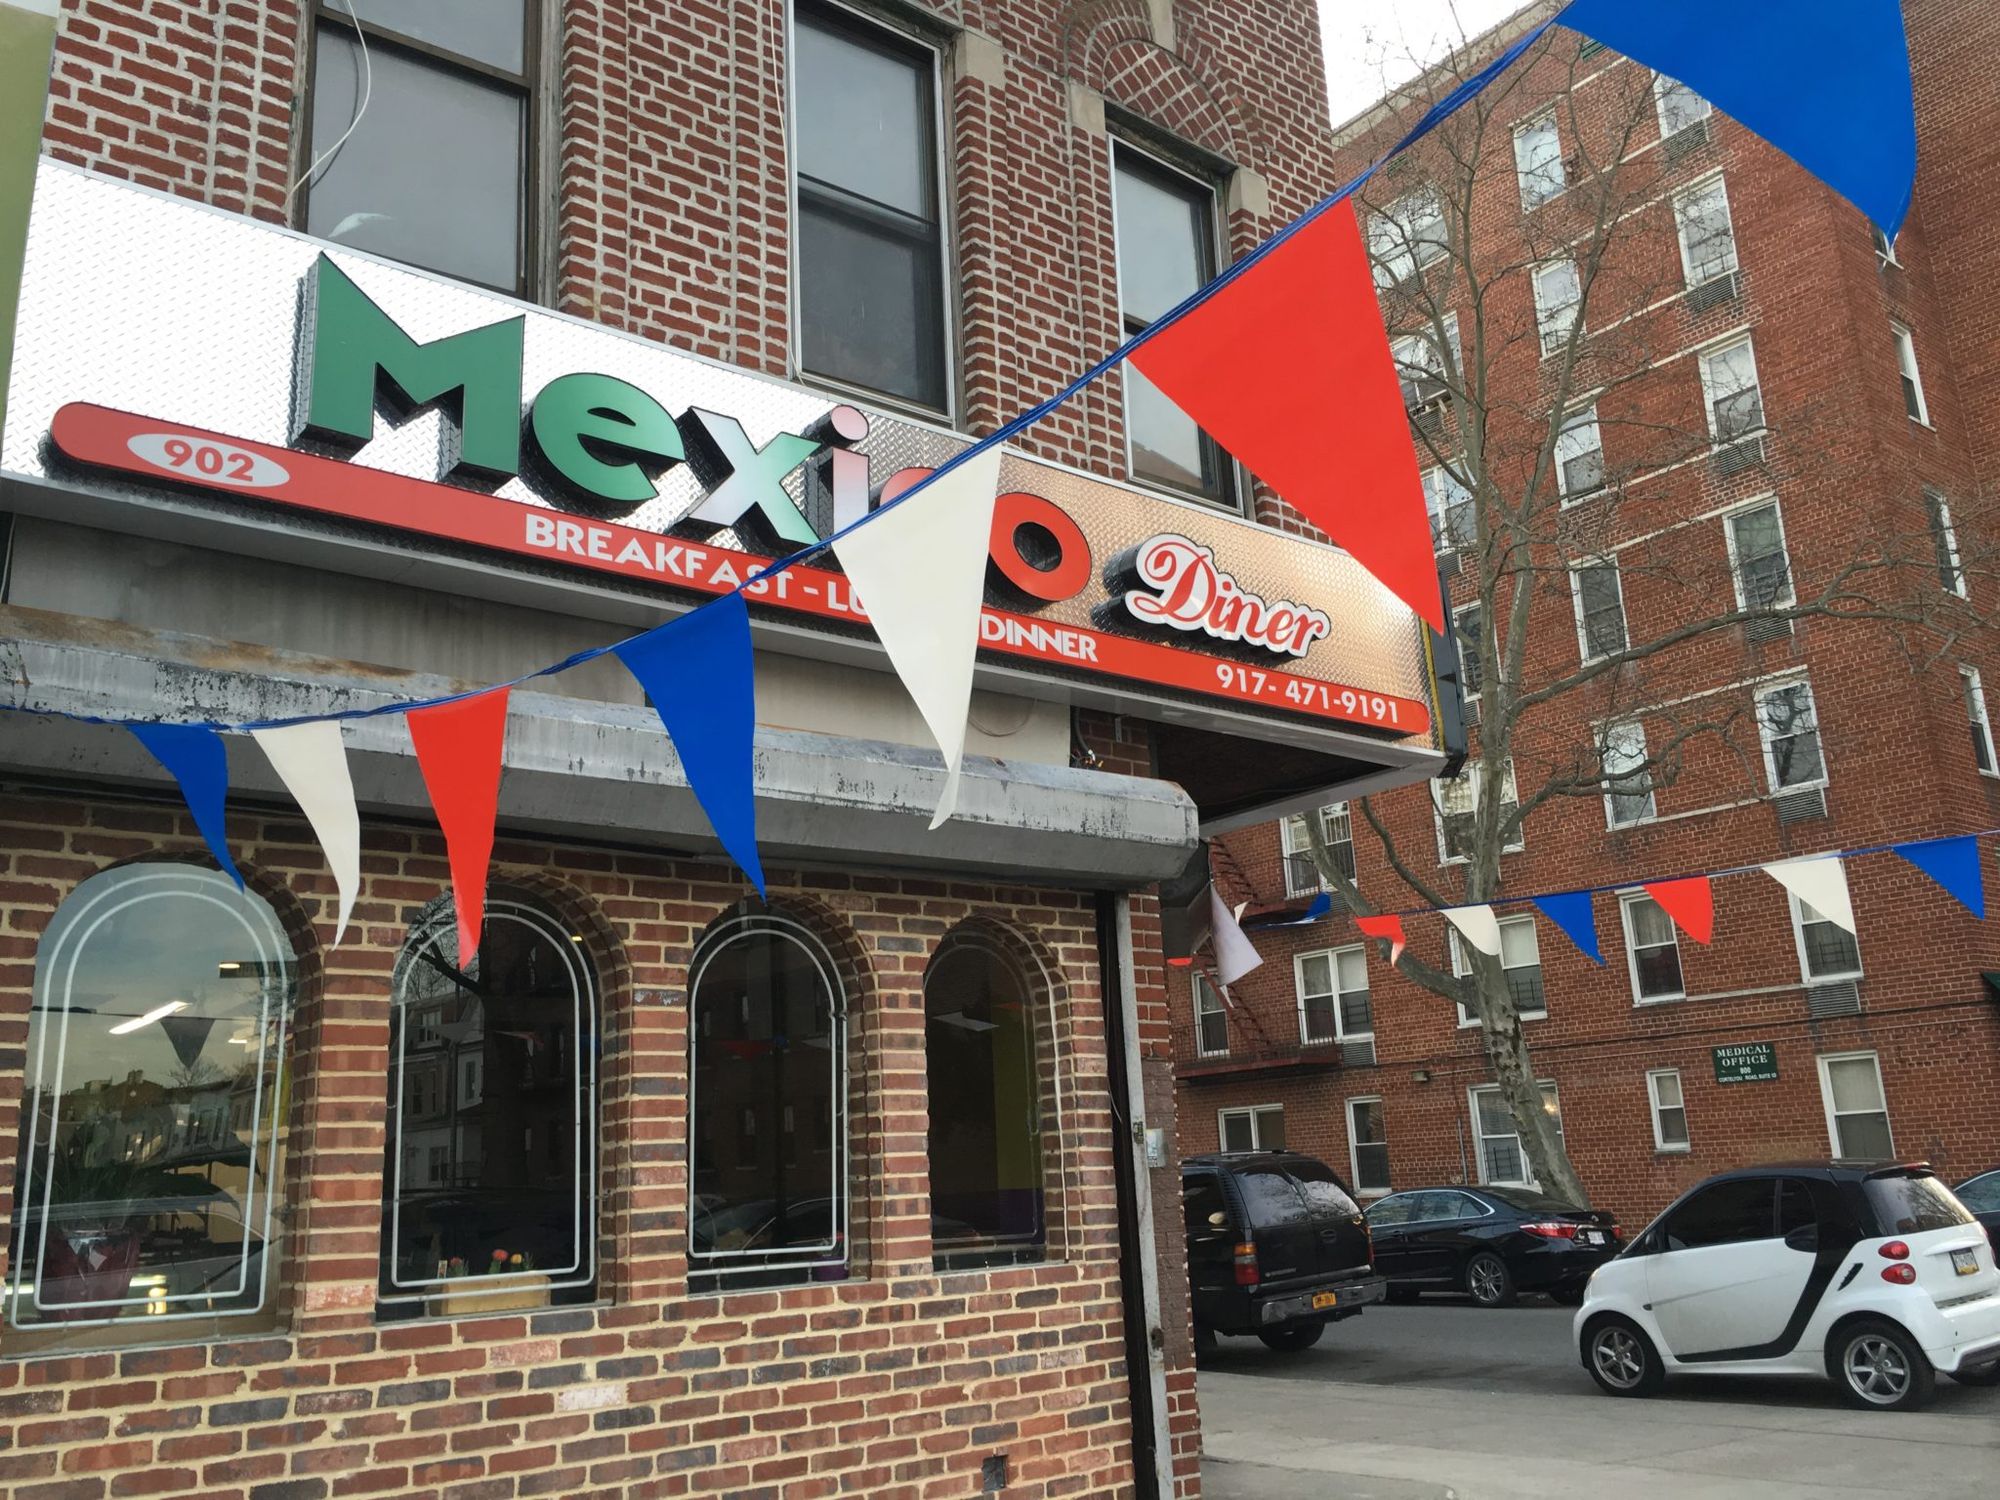 Family-Owned Mexico Diner Brings Puebla Cuisine To Cortelyou Road